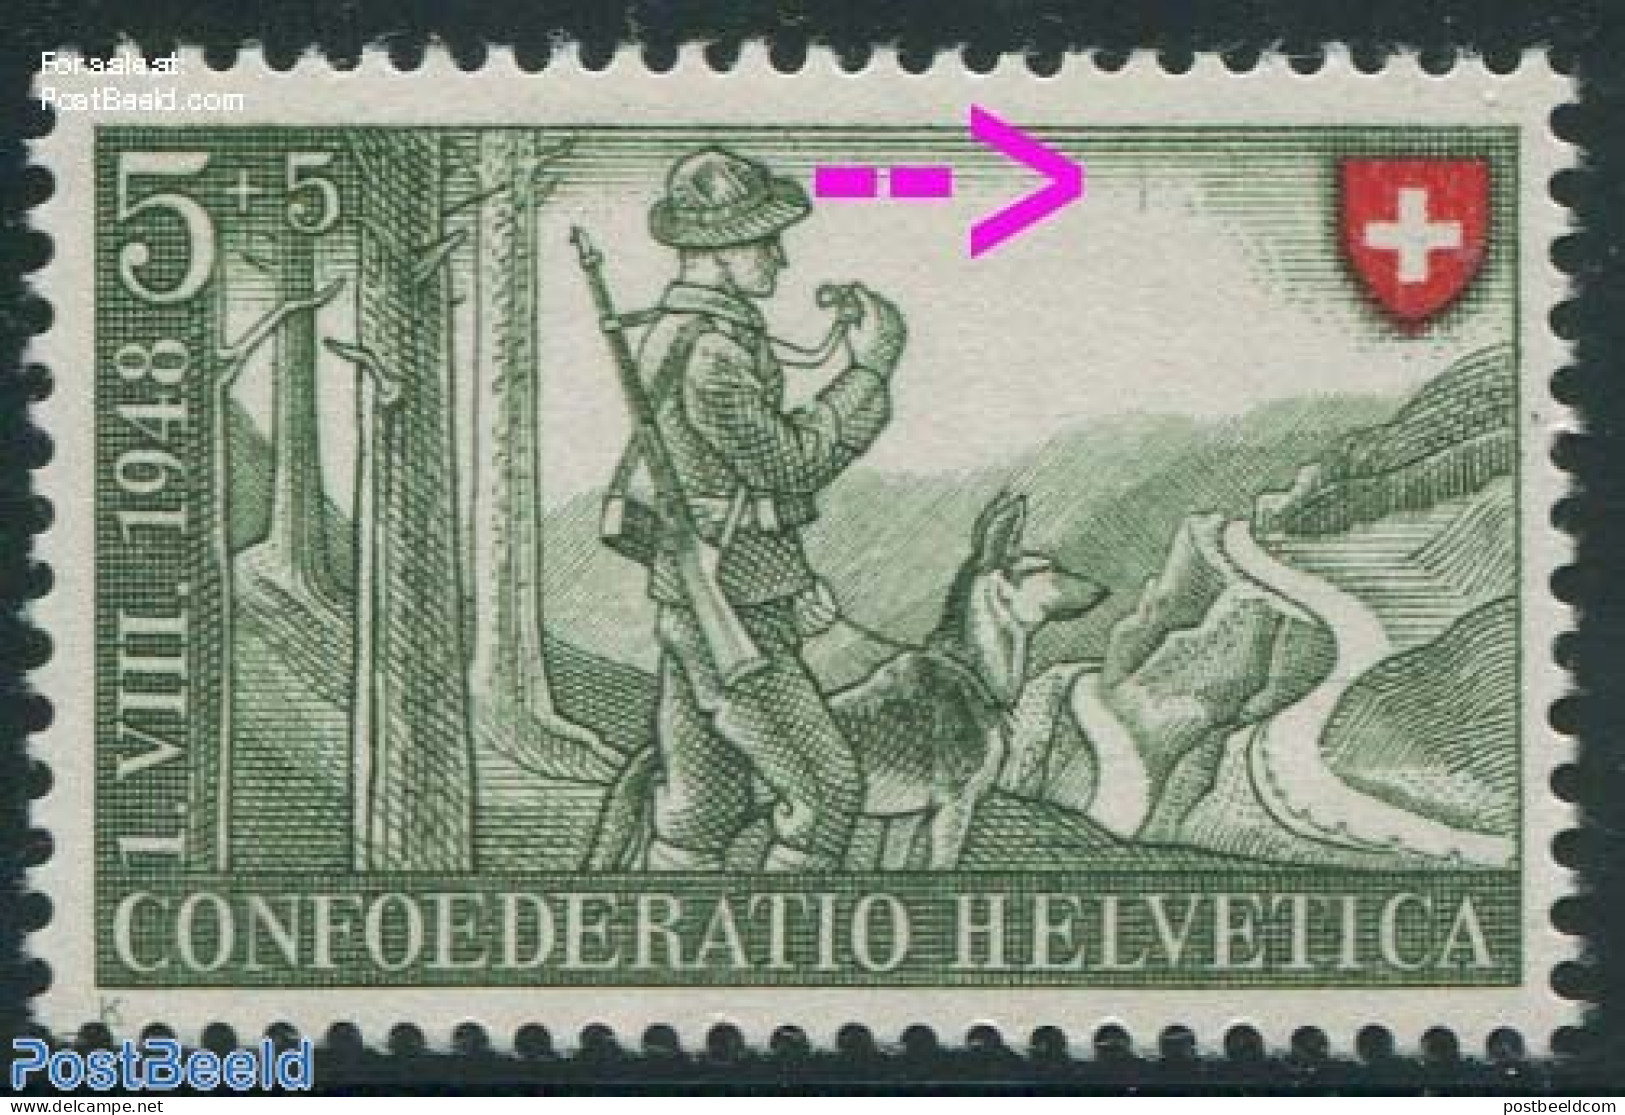 Switzerland 1948 5+5c, Plate Flaw, Vertical Line In Sky, Mint NH, Nature - Various - Dogs - Errors, Misprints, Plate F.. - Neufs